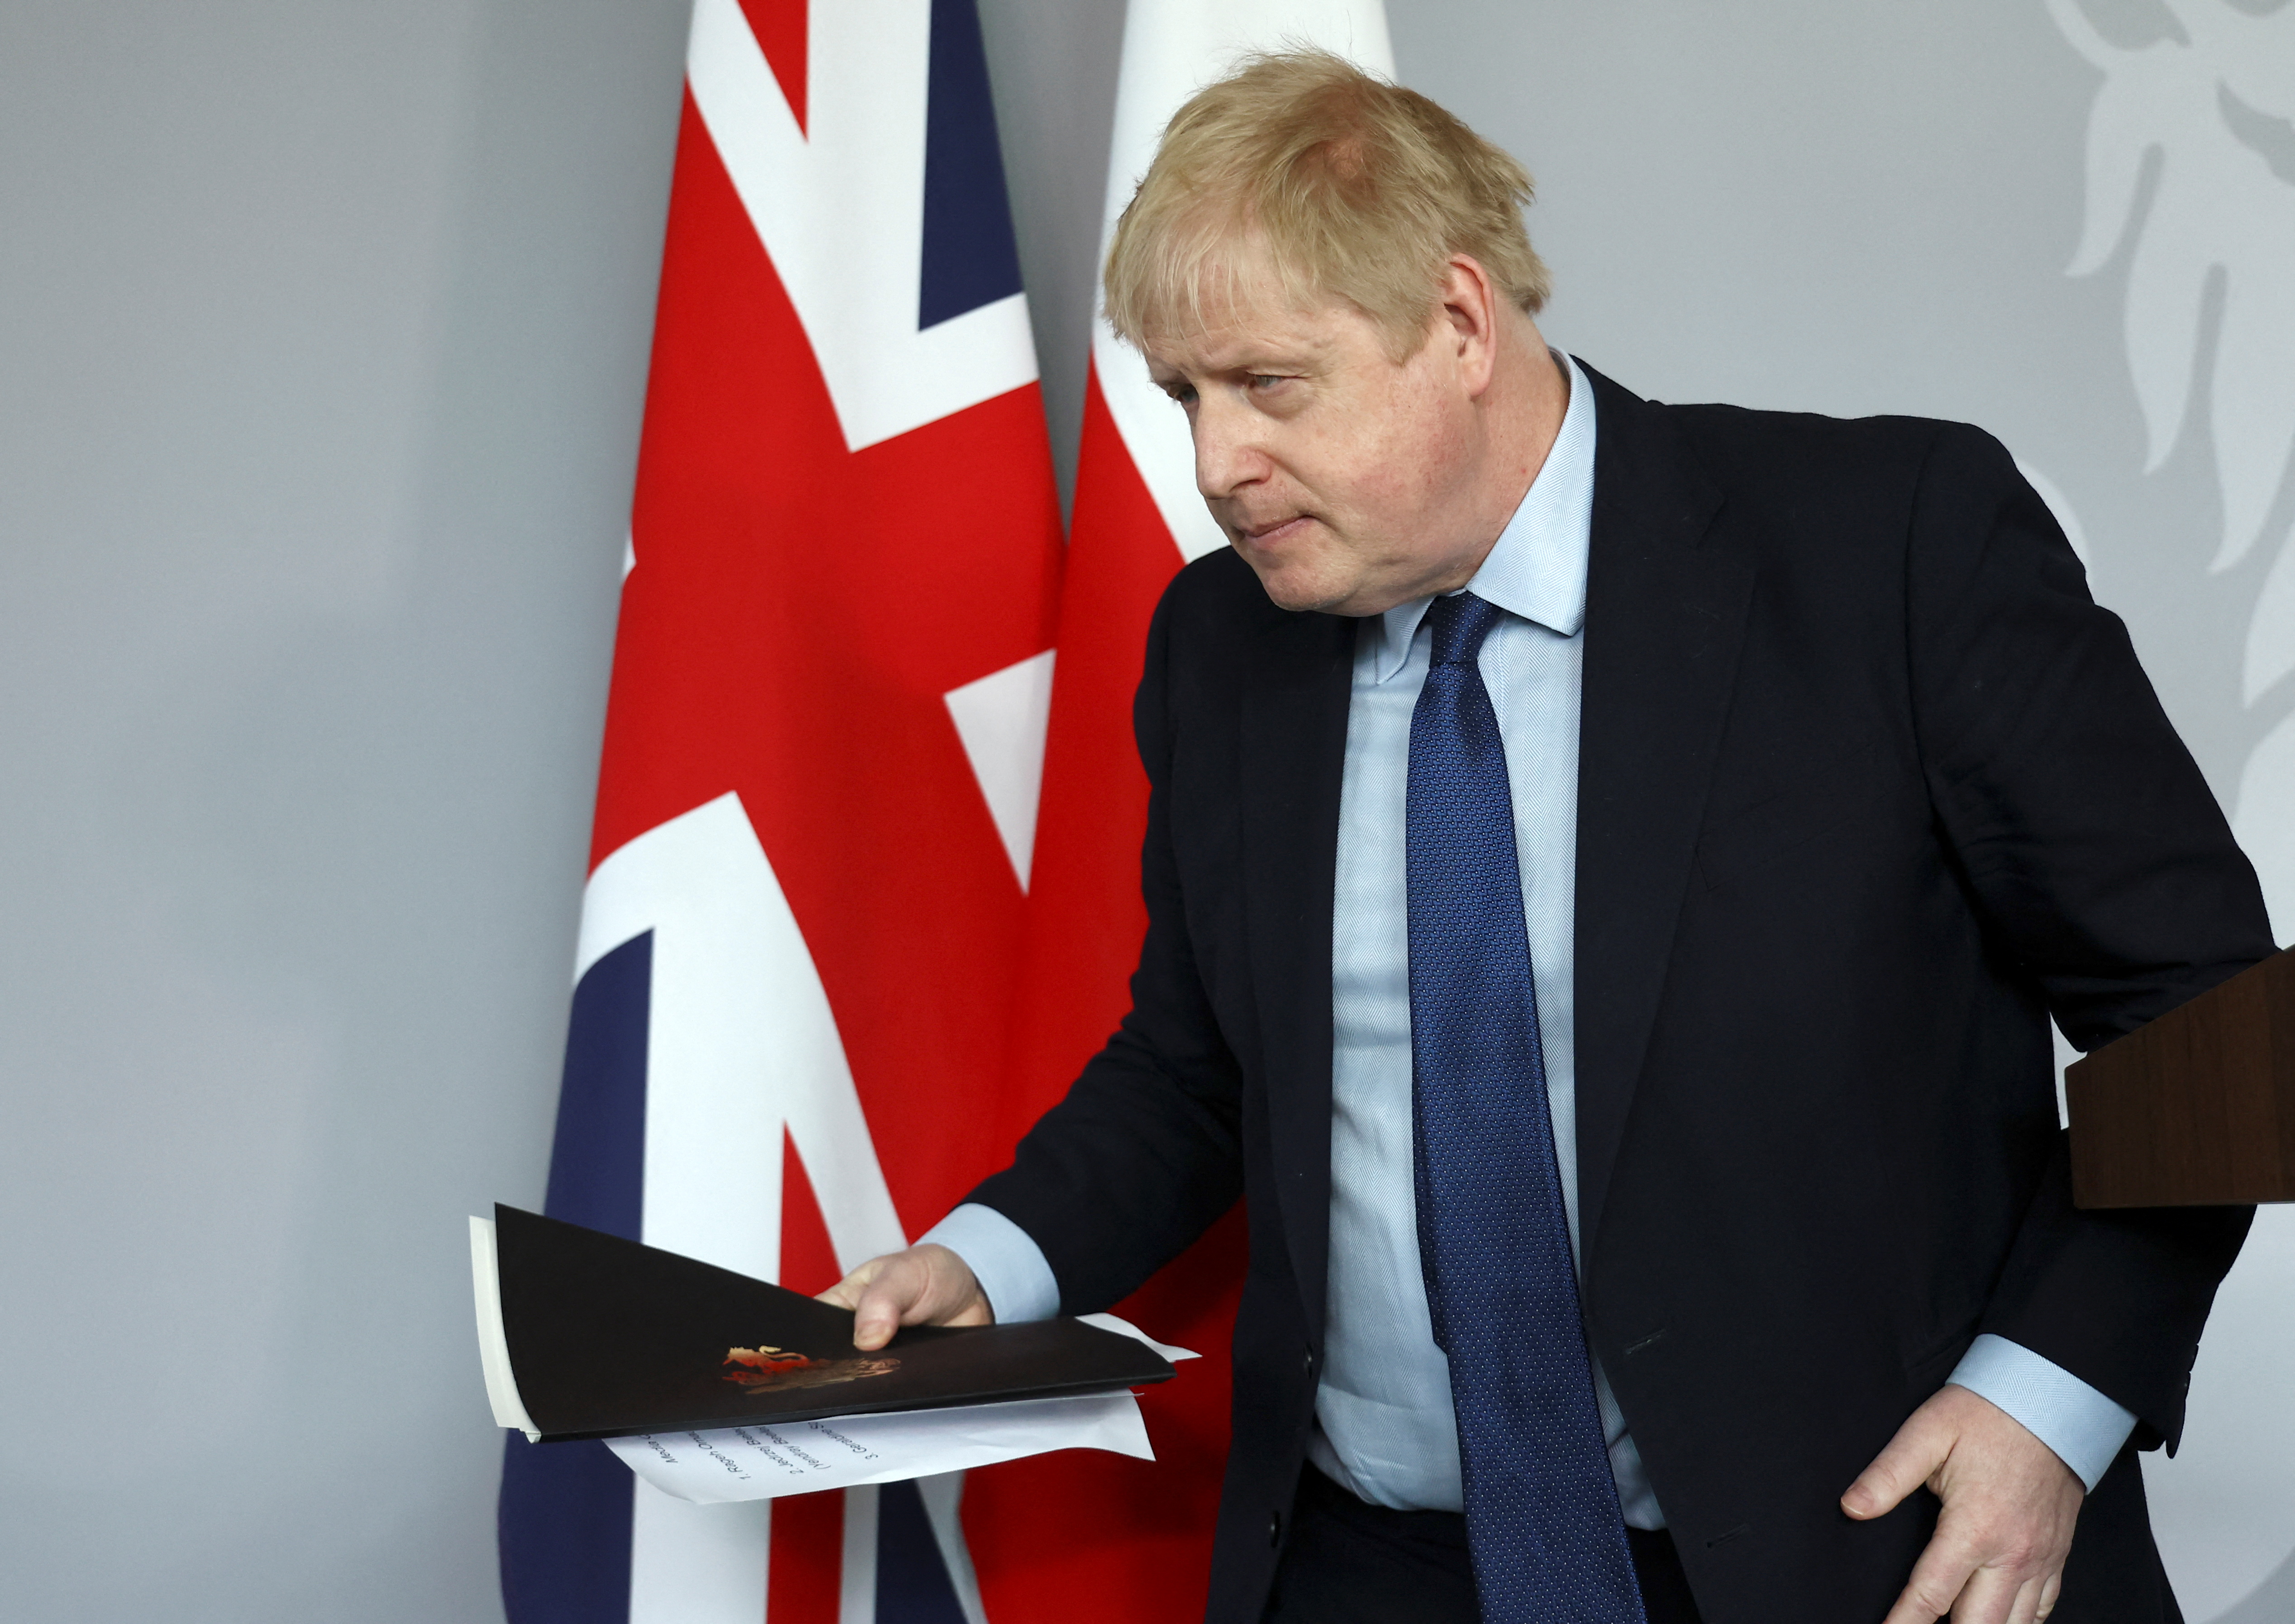 British Prime Minister Boris Johnson holds a news conference at British Embassy in Warsaw